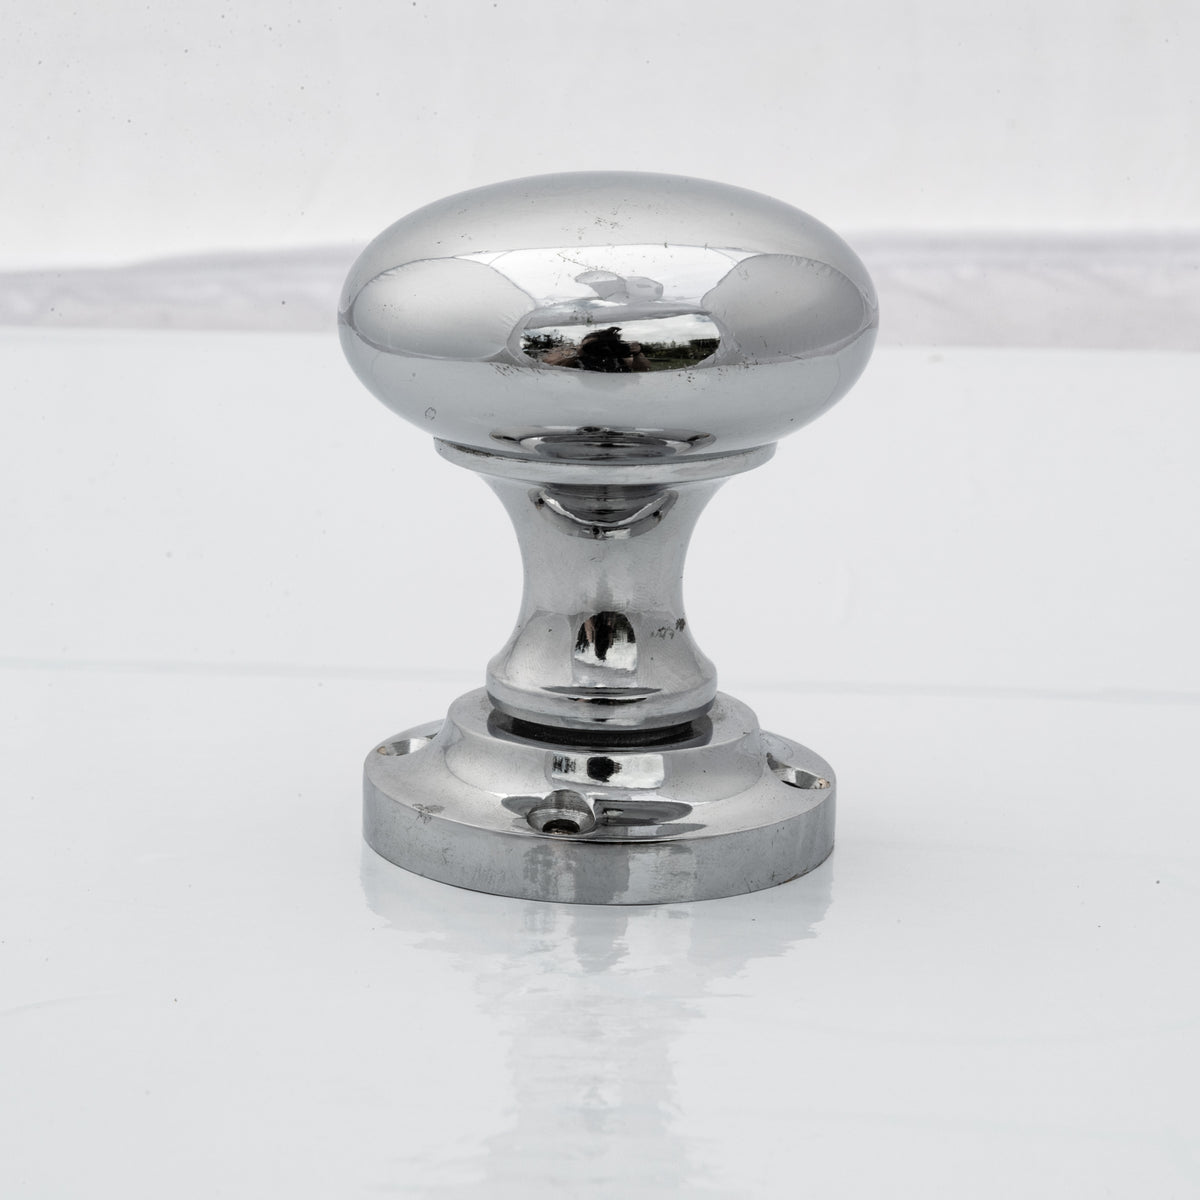 Reclaimed Polished Chrome Door Knob | The Architectural Forum